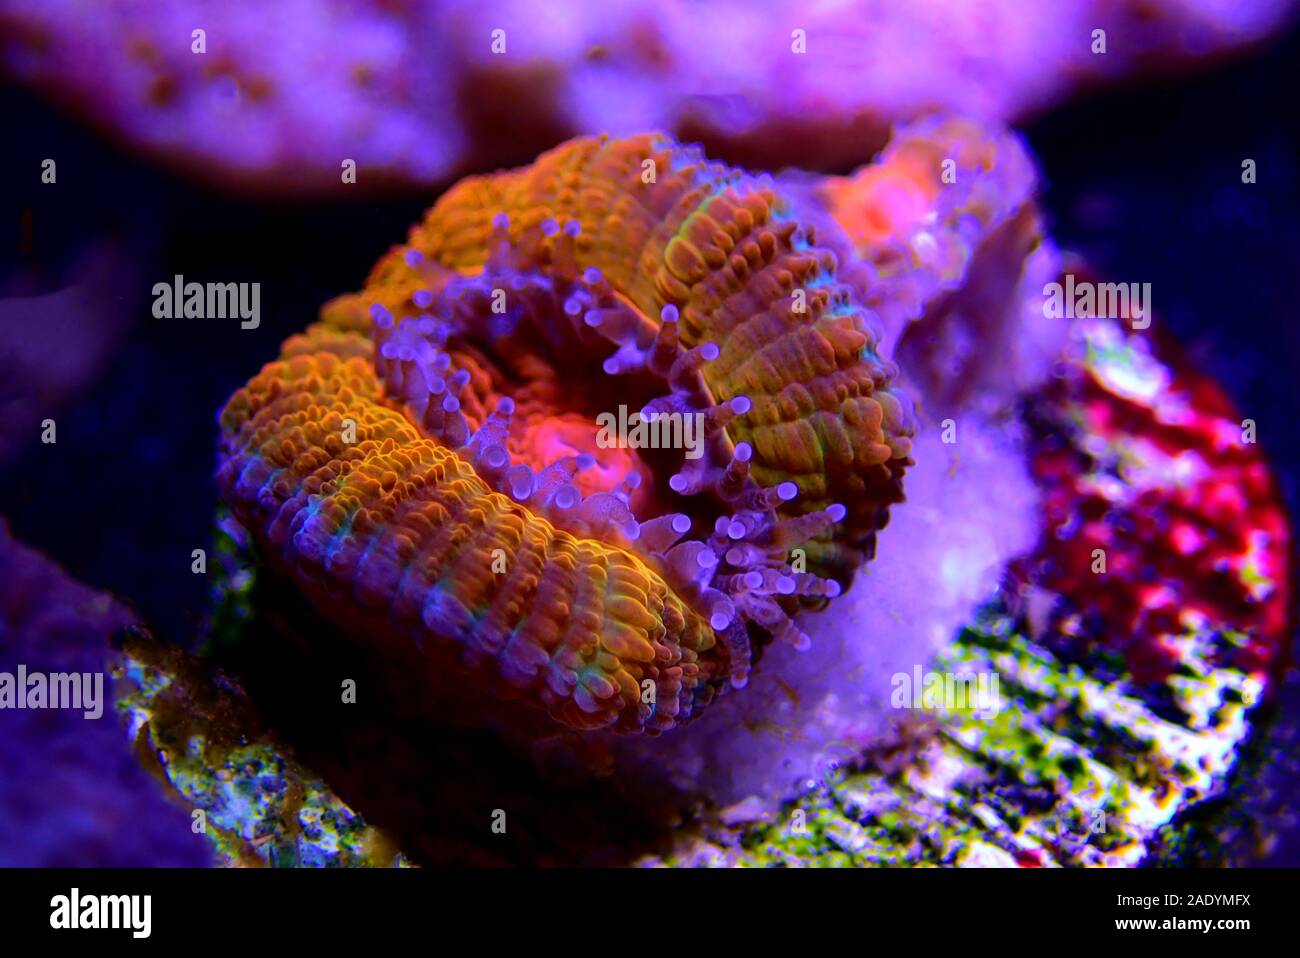 Acanthastrea Lordhowensis Coral - (Micromussa lordhowensis) Stock Photo